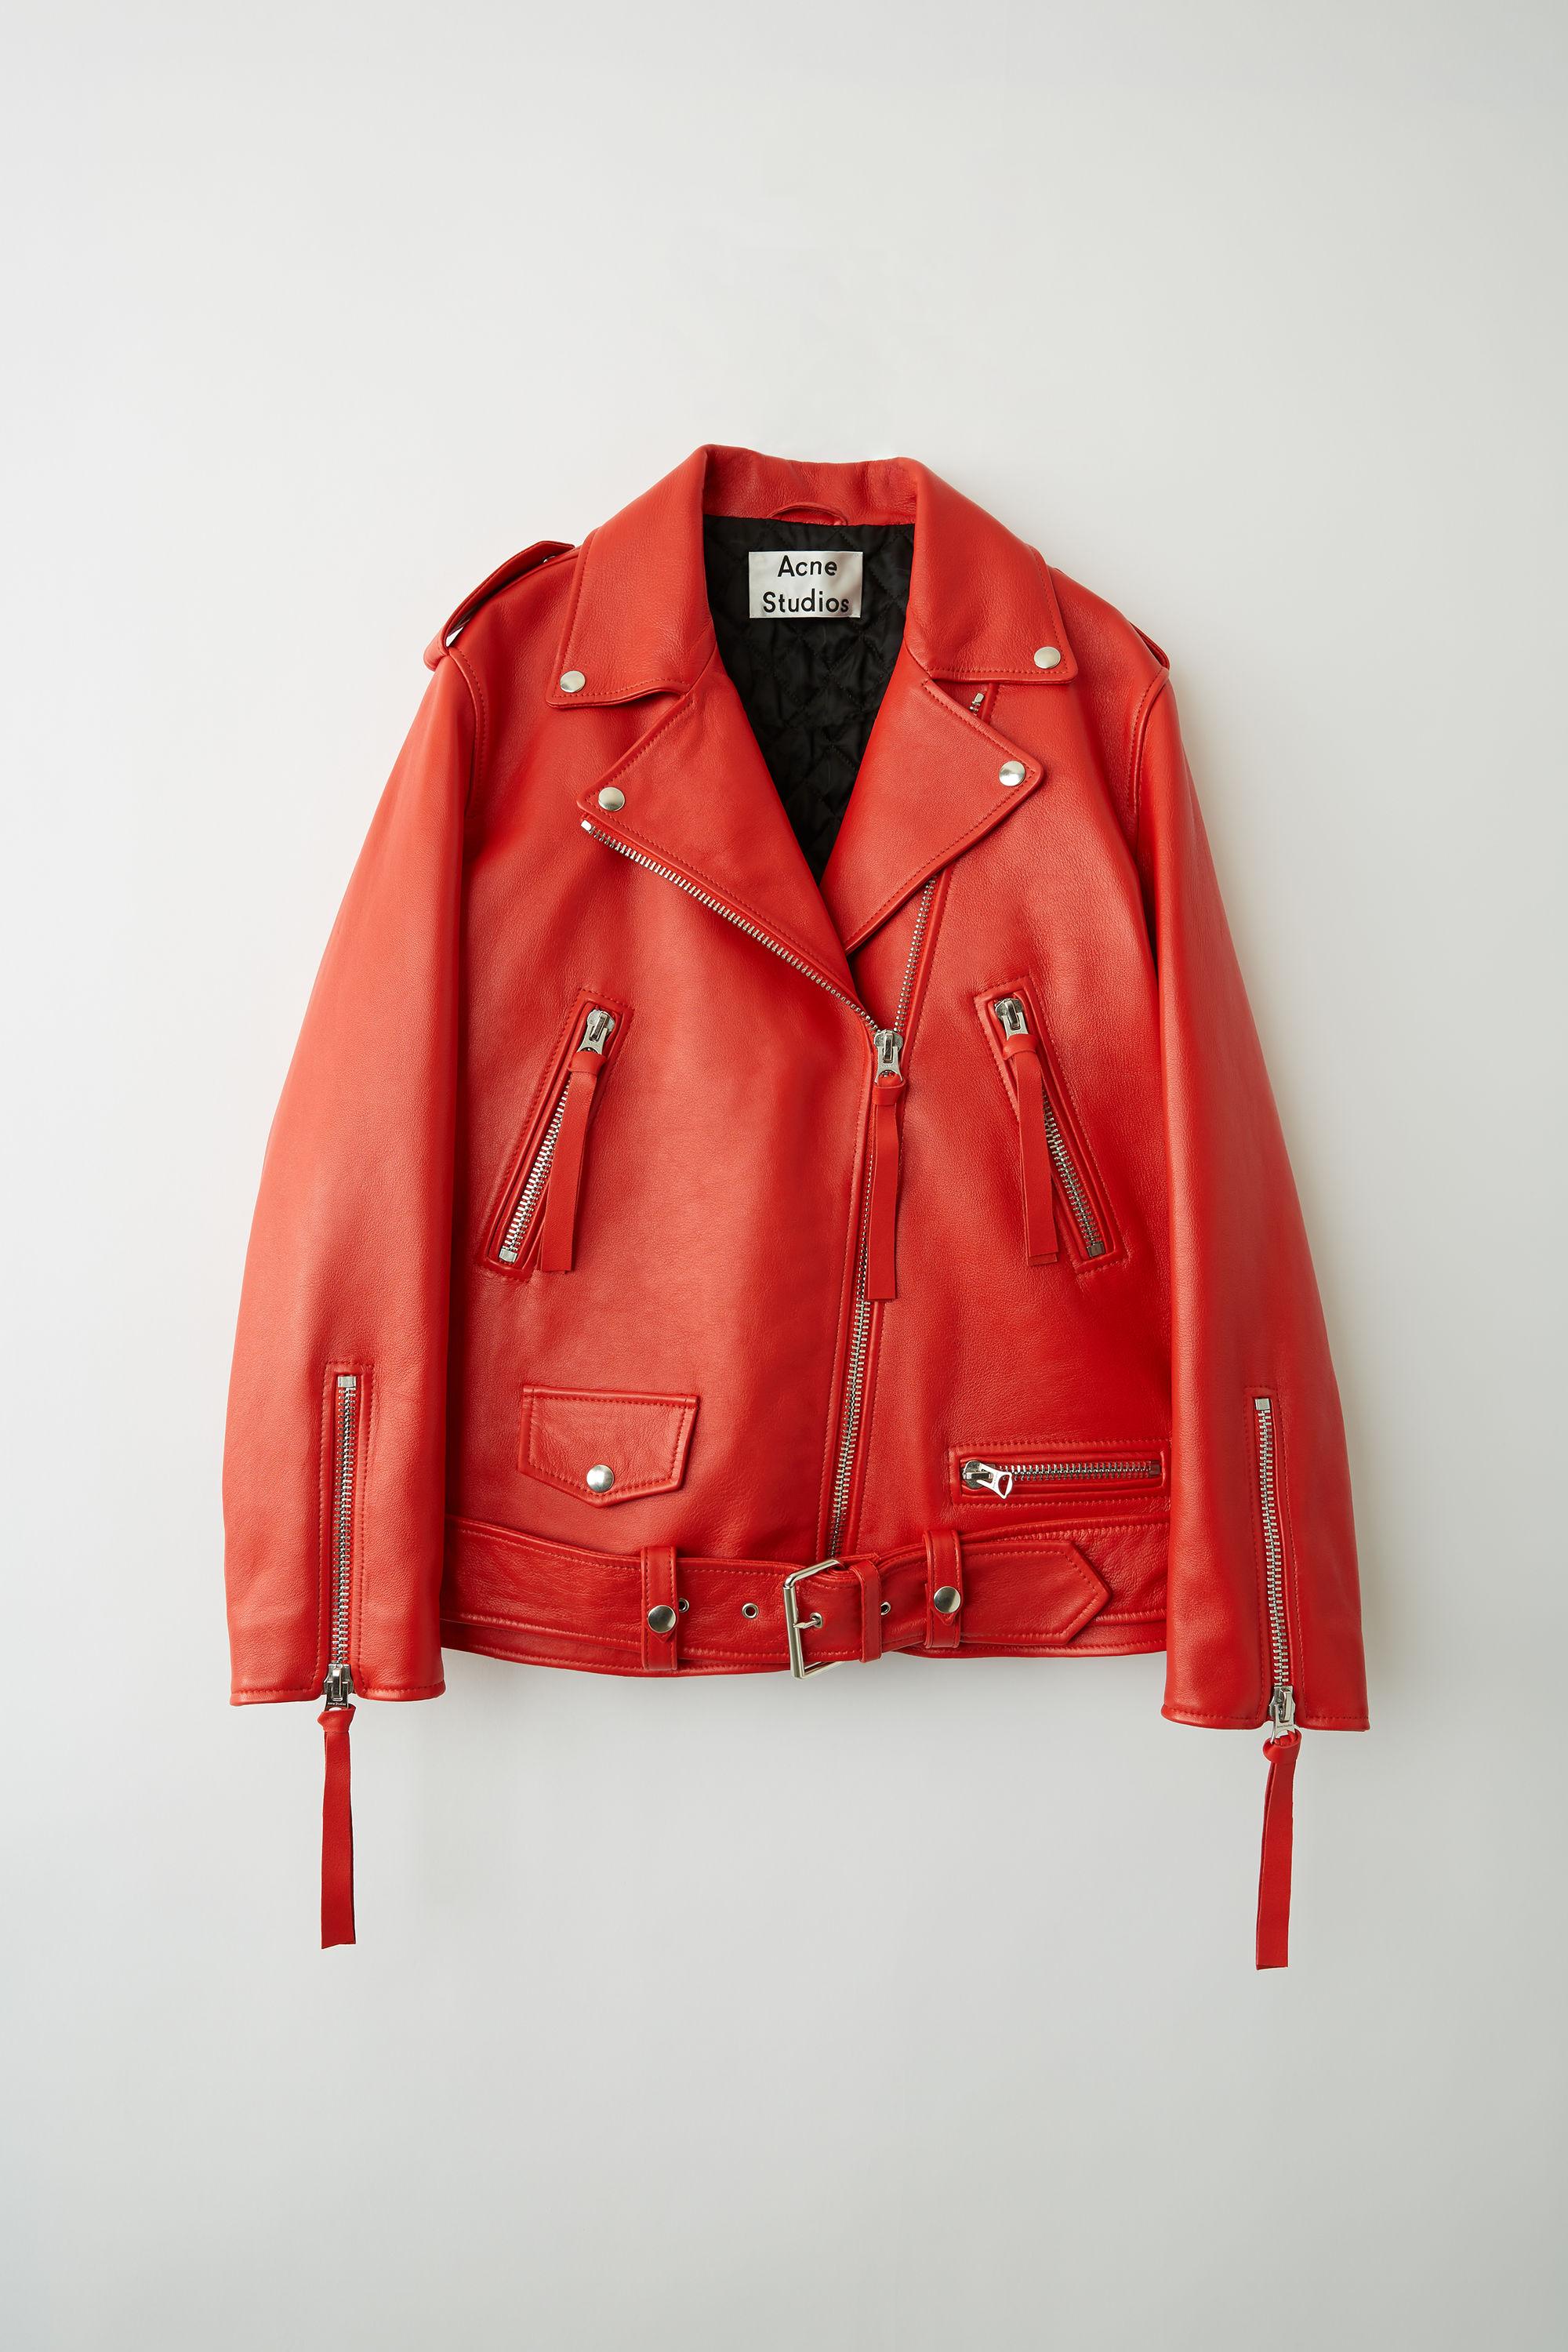 Acne Studios New Myrtle Coral Red Oversized Leather Jacket - Lyst